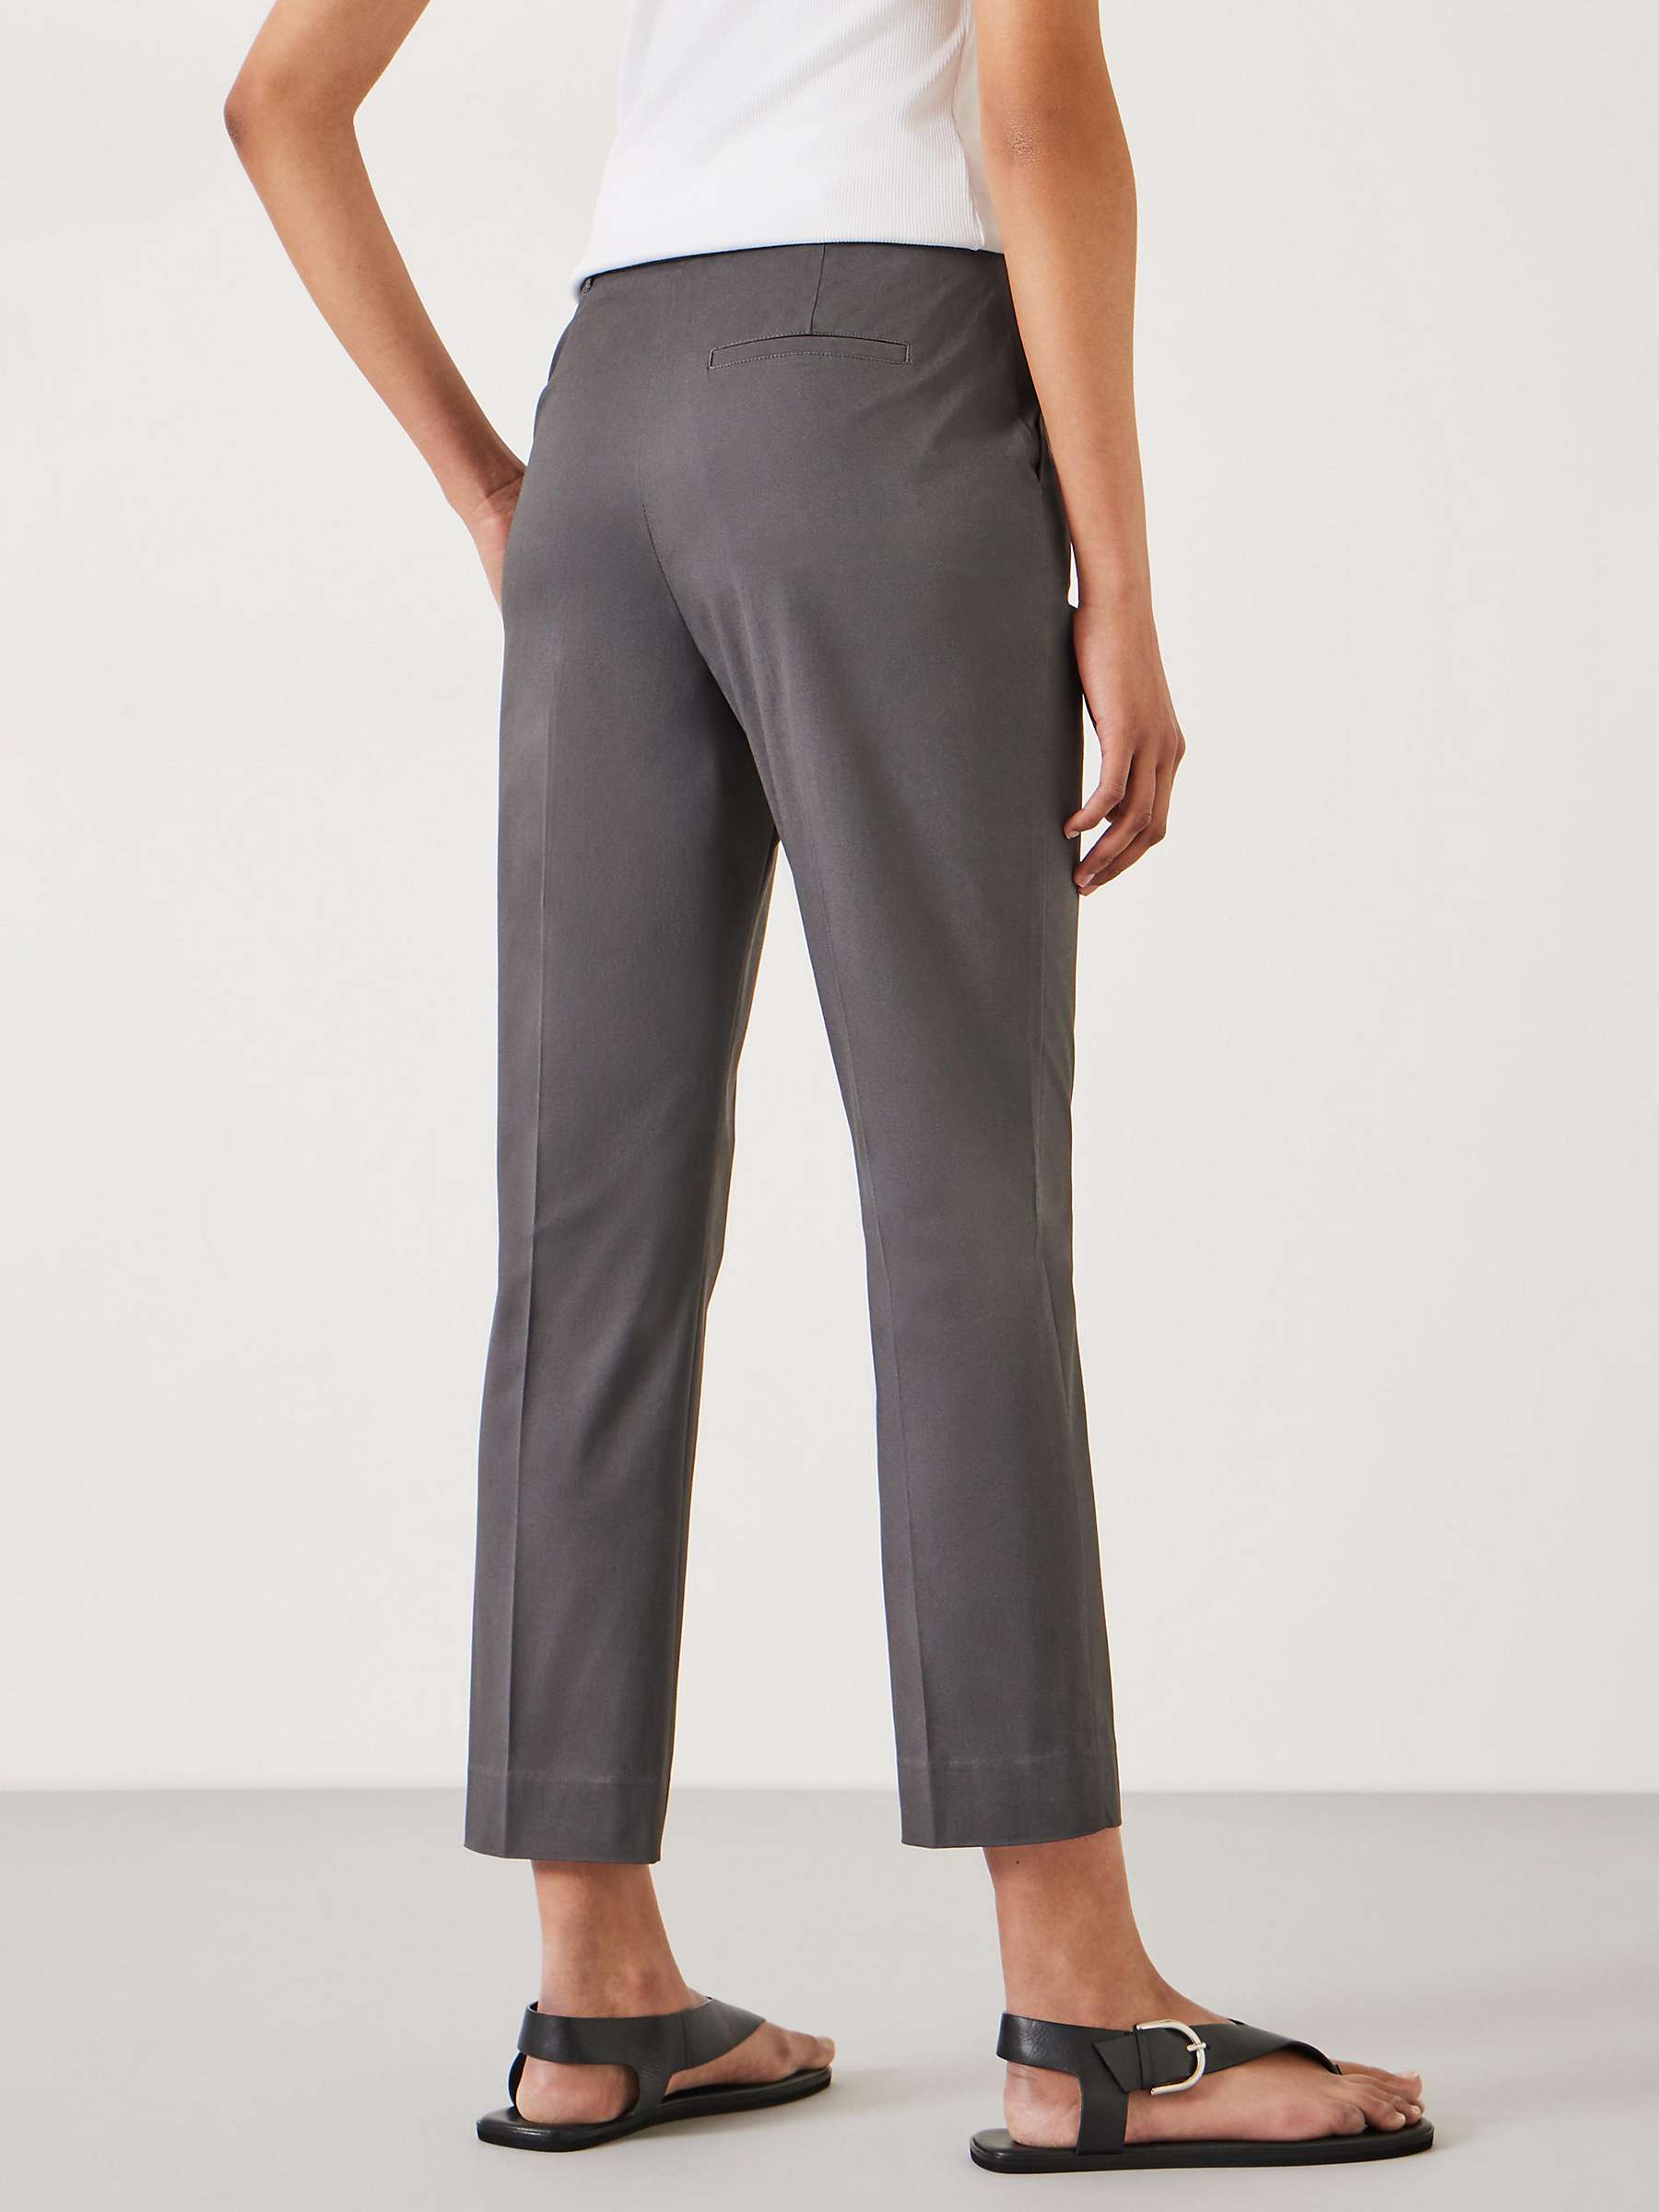 Buy HUSH Hayes Cigarette Cotton Trousers Online at johnlewis.com